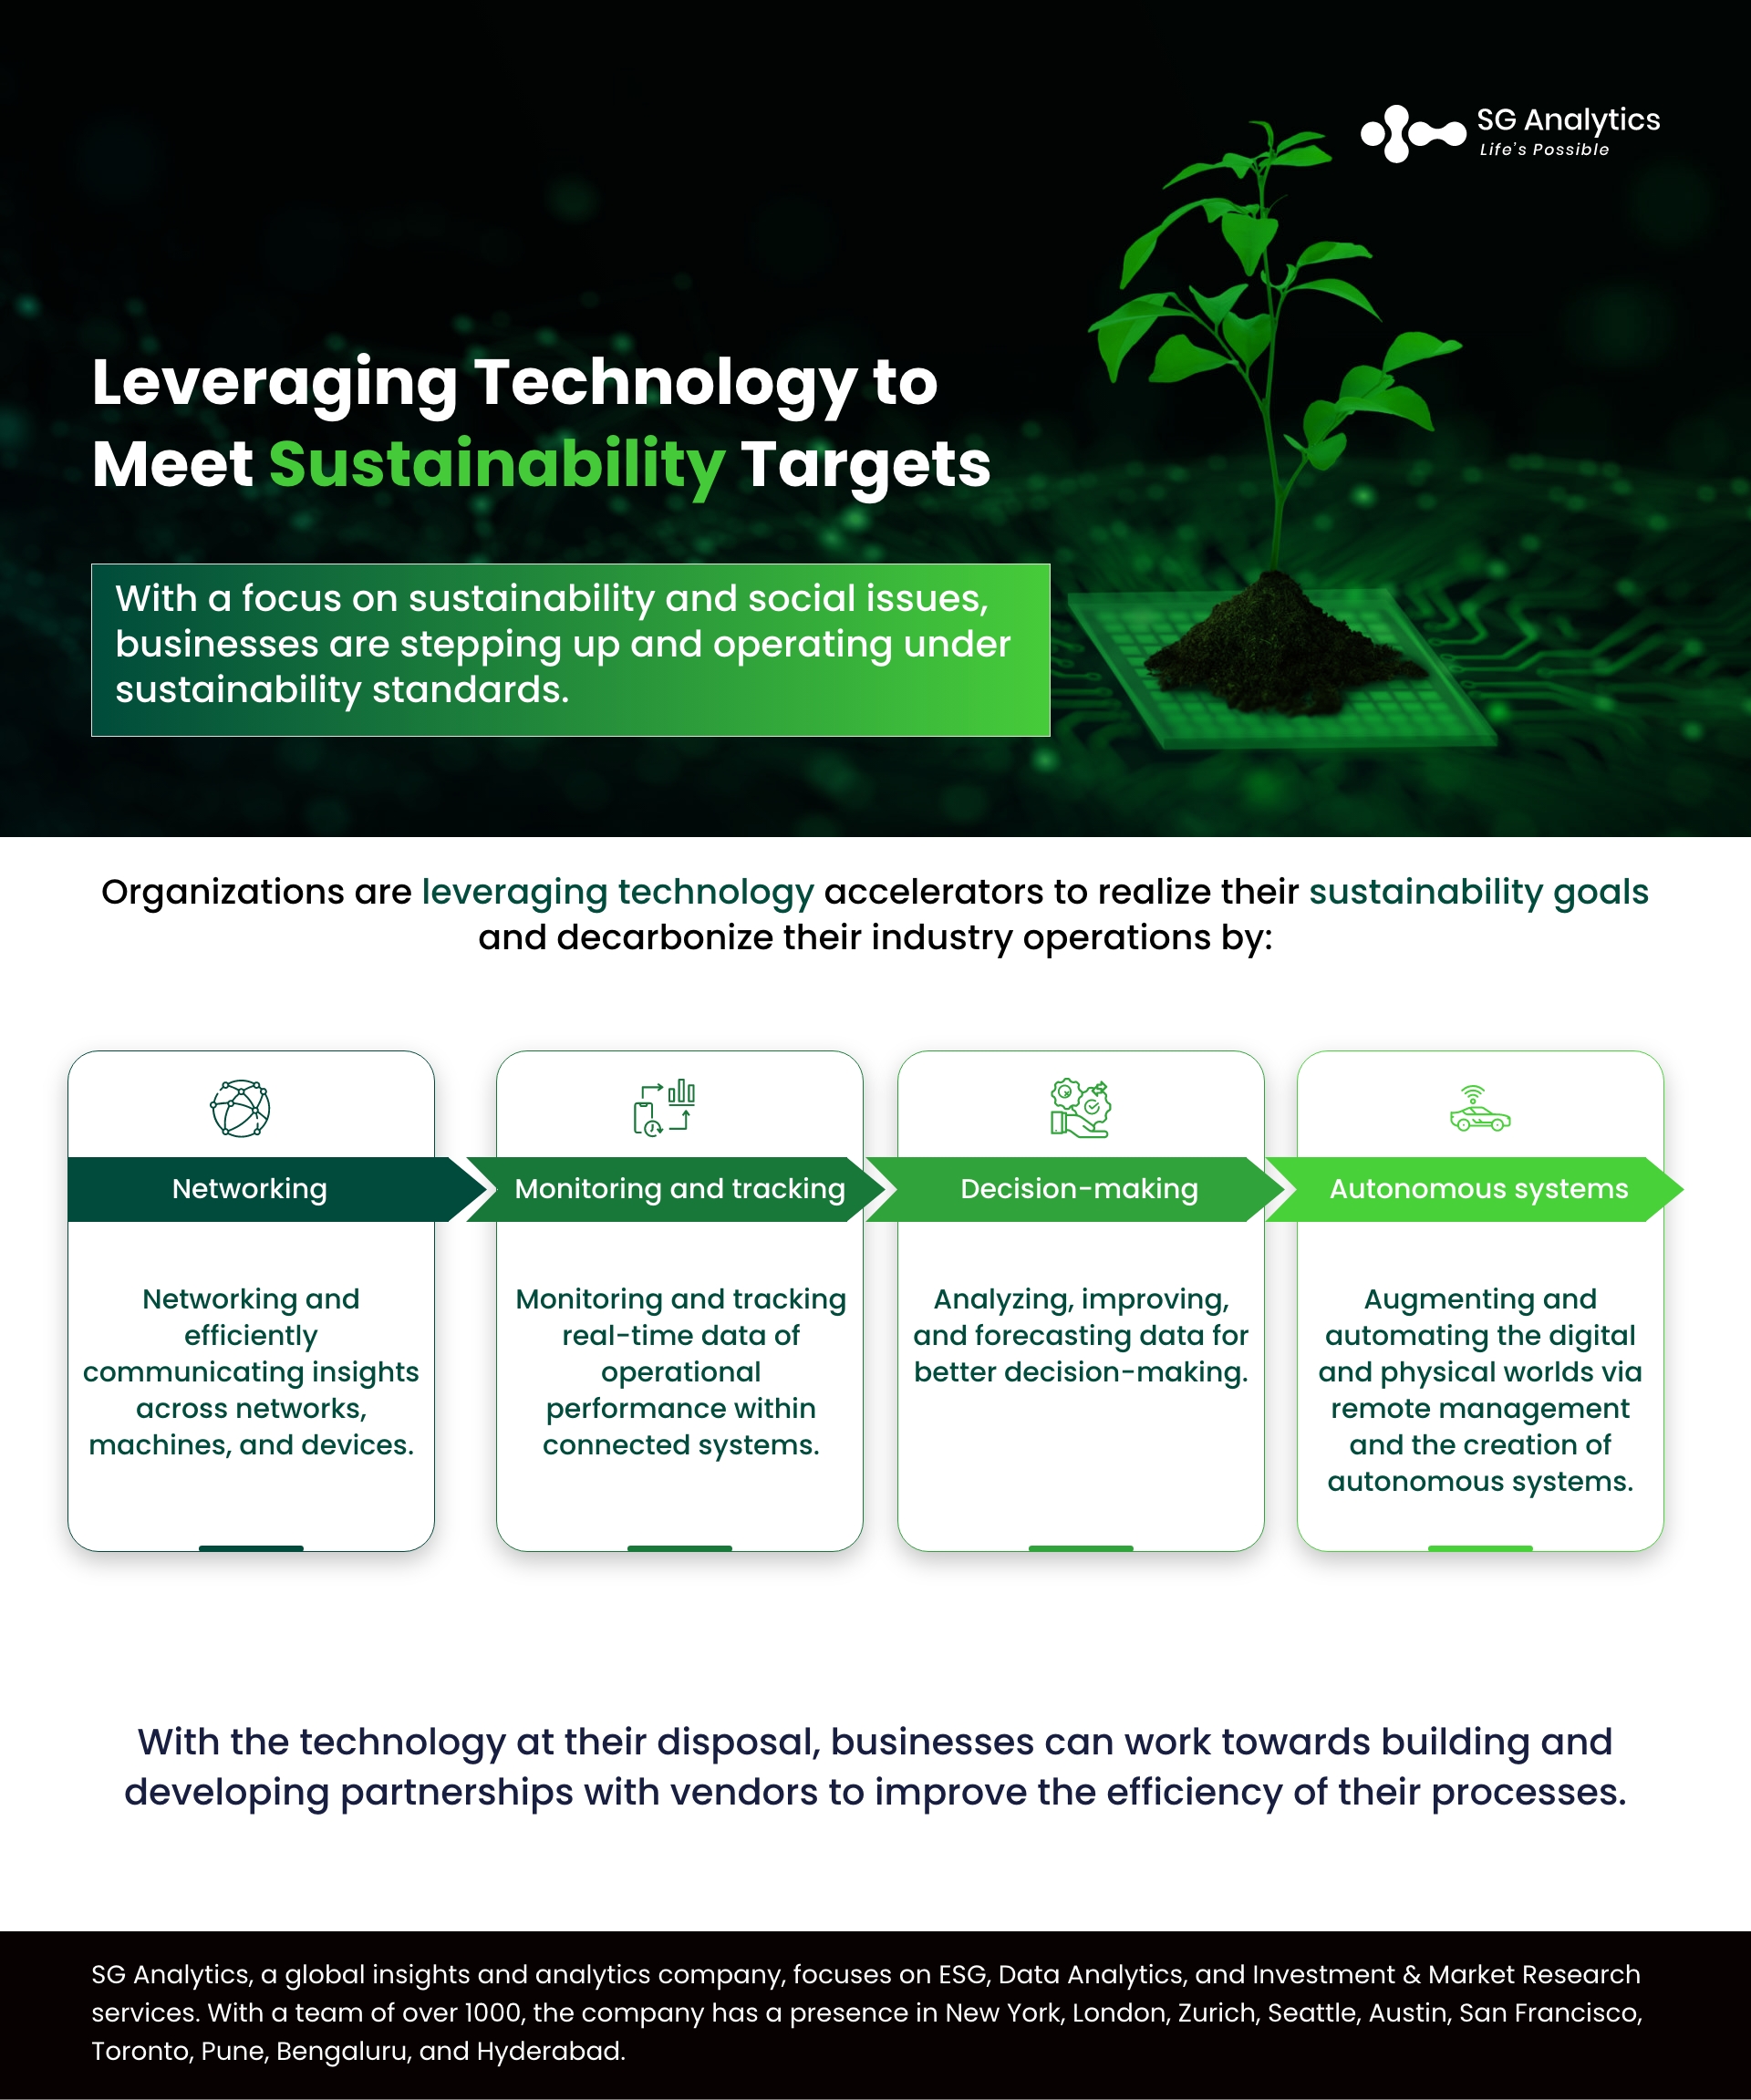 Leveraging Technology to Meet Sustainability Targets